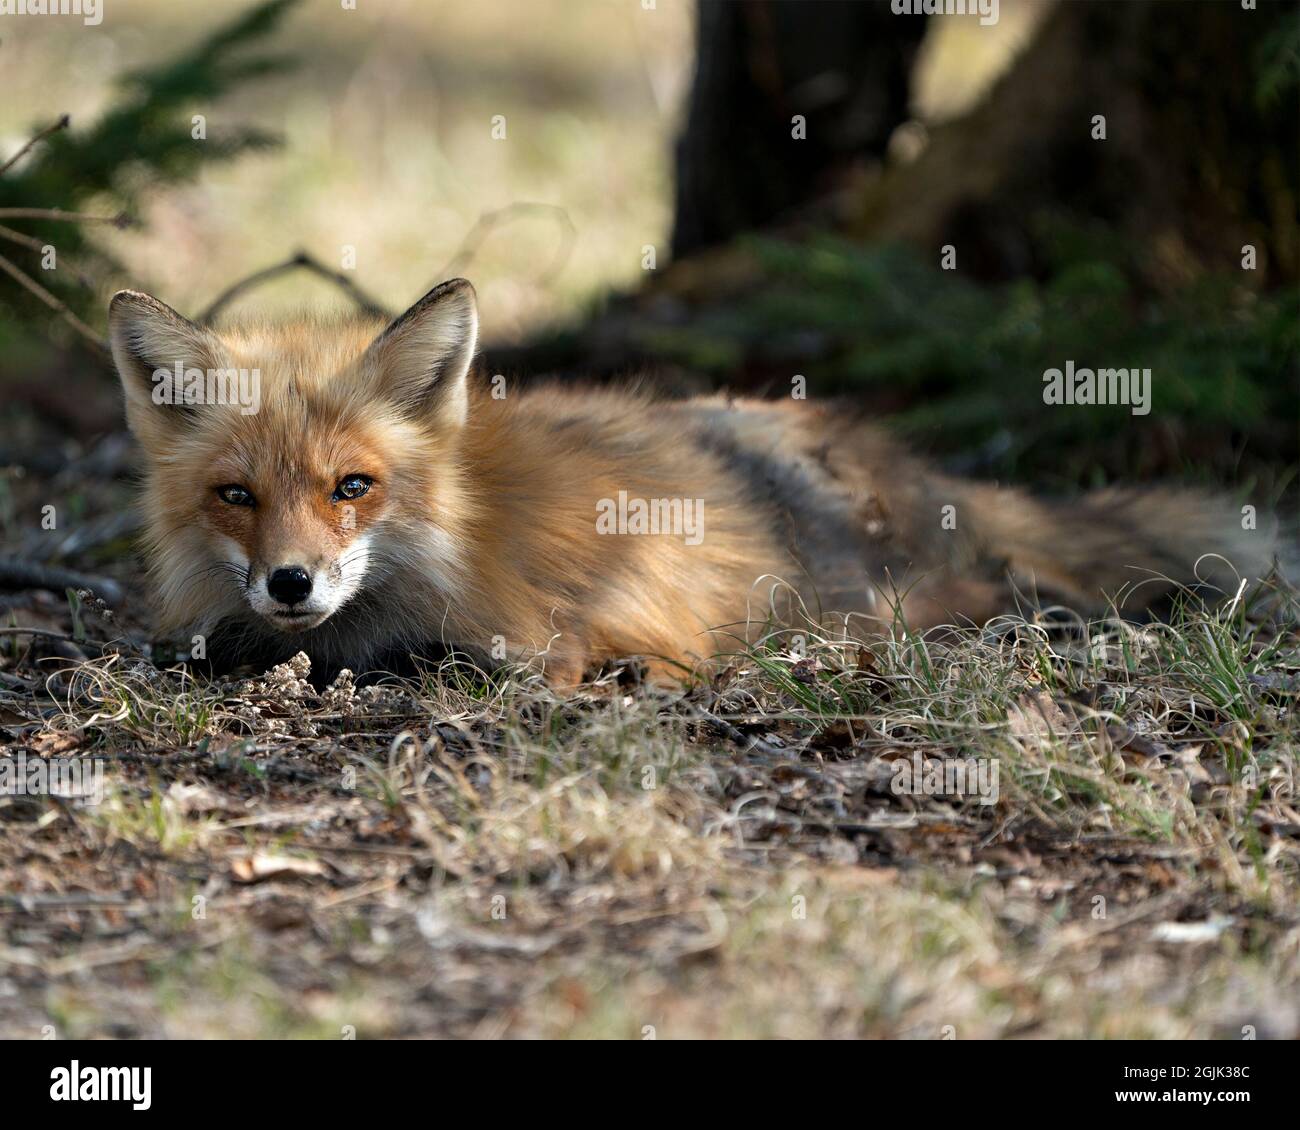 Red fox lying down on grass with a blur background in the springtime season and looking at camera in its environment and habitat. Fox Image. Picture. Stock Photo